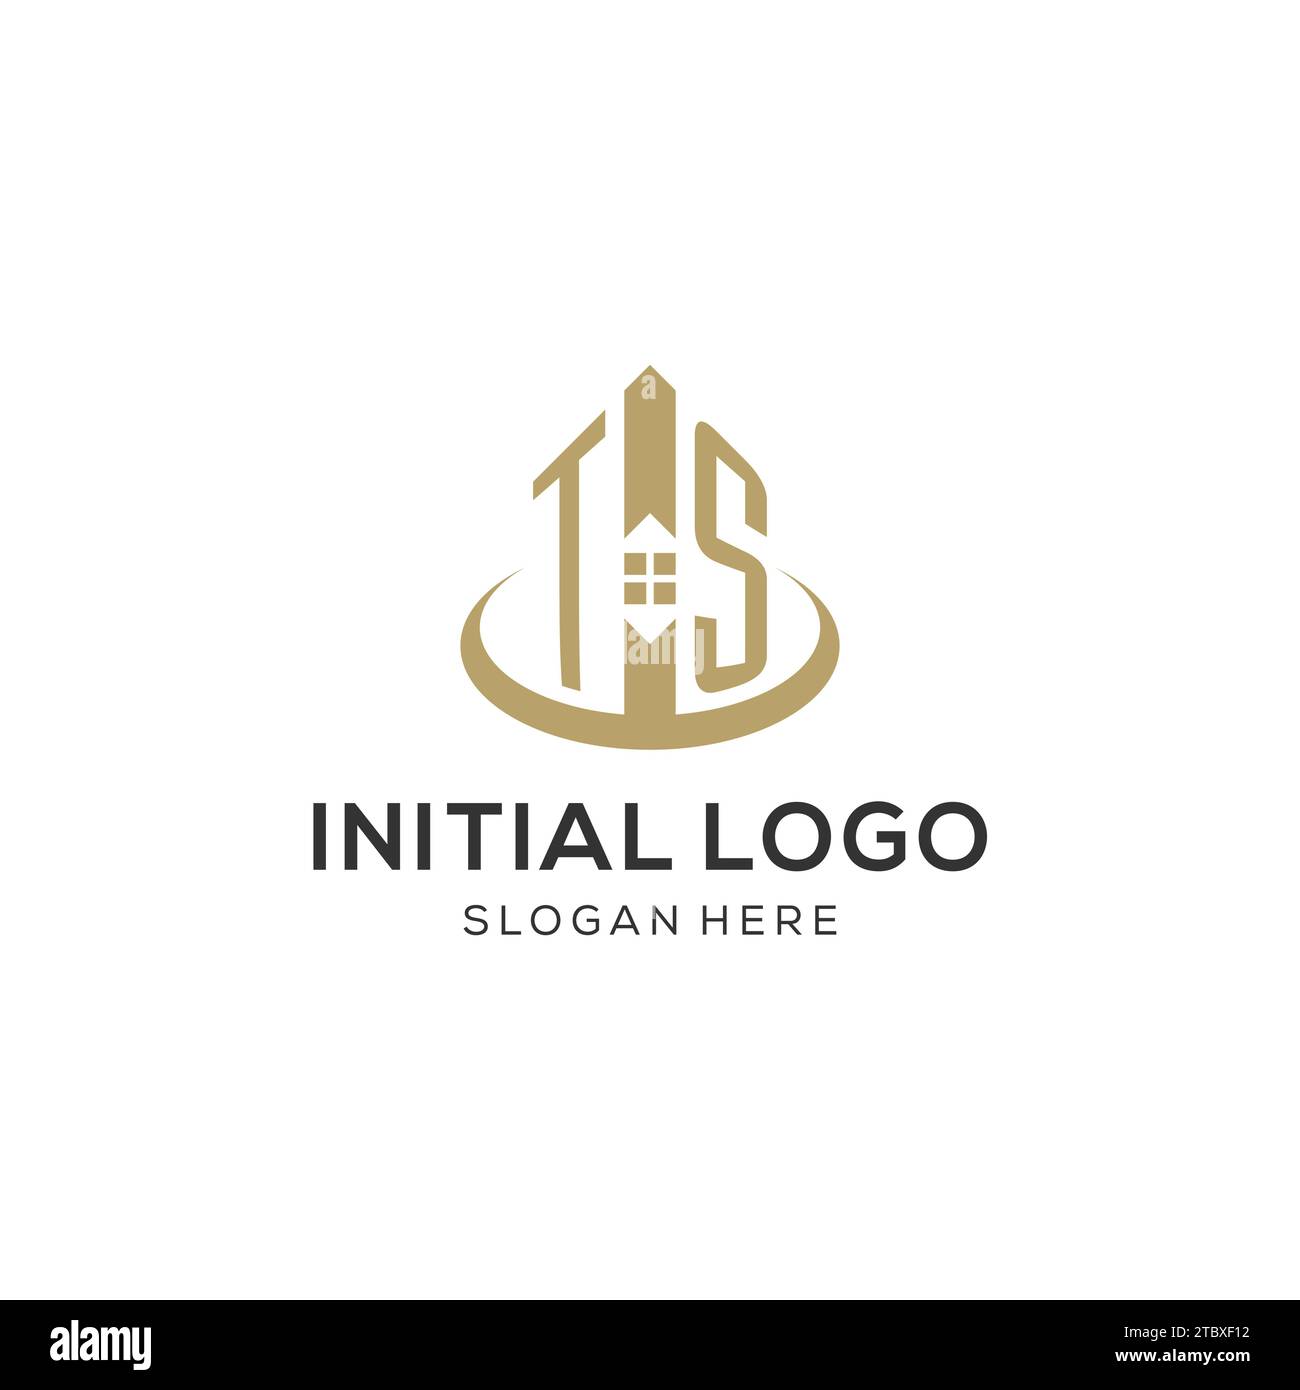 Initial TS logo with creative house icon, modern and professional real estate logo design vector graphic Stock Vector